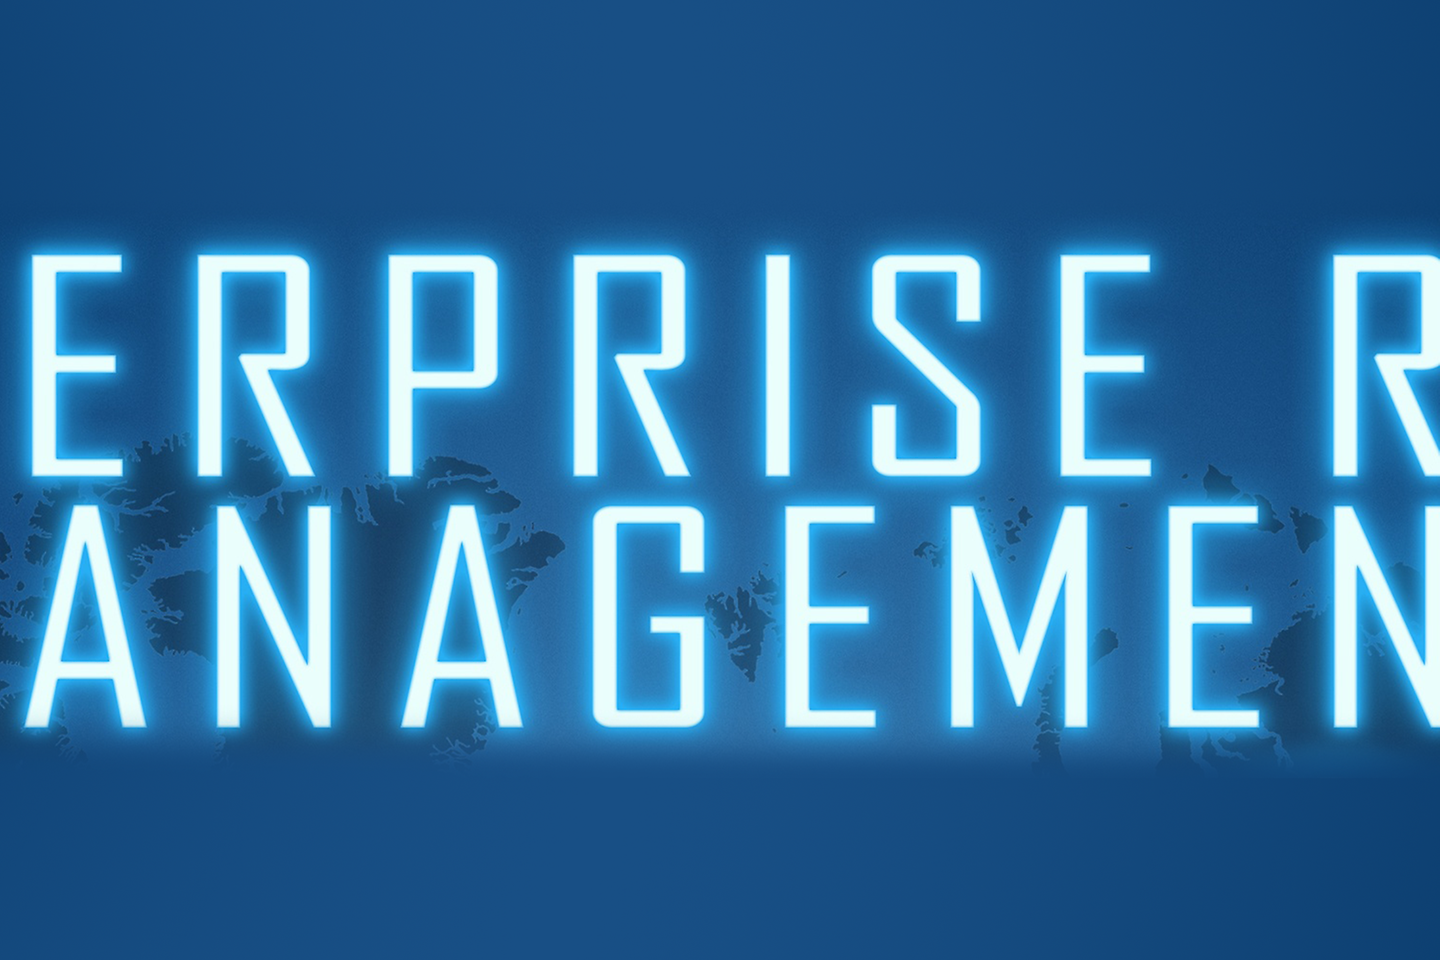 Enterprise Risk Management lettering against a blue background with a map of the world.